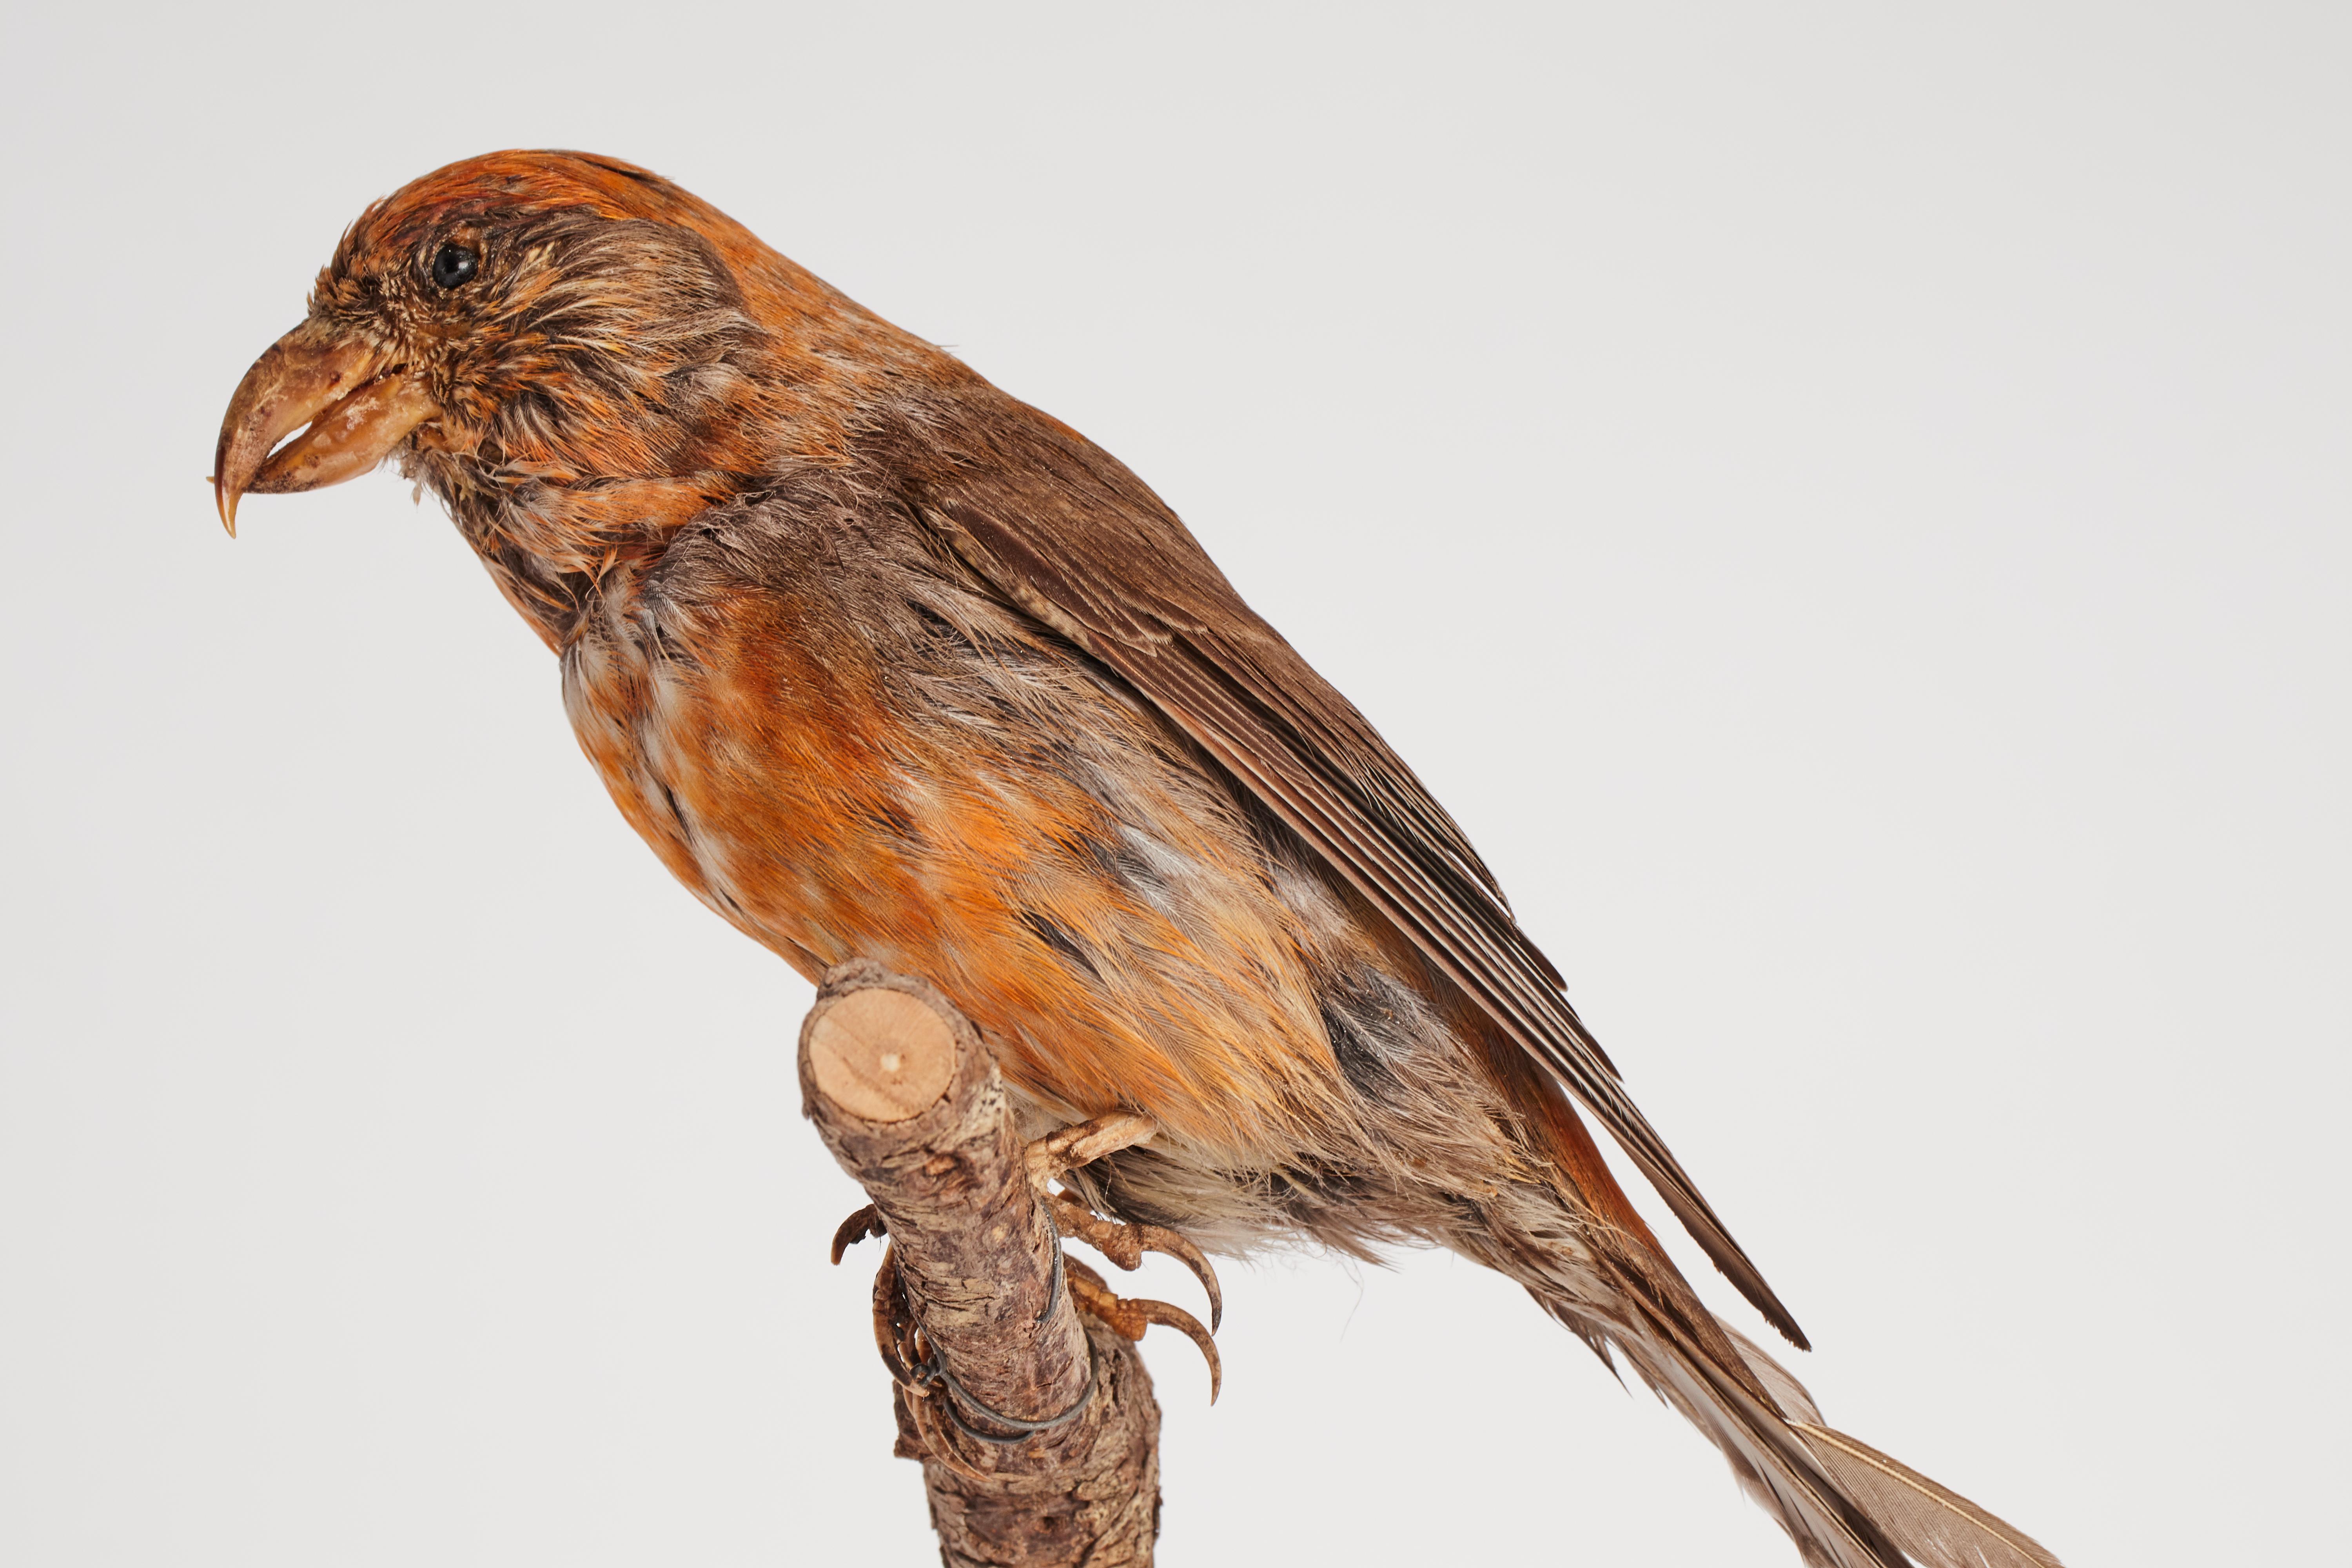 Natural specimen from Wunderkammer Stuffed bird Red crossbill (Loxia Curvirostra) mounted on a wooden base with cartouche Specimen for laboratory and Natural history cabinet. S. Brogi Naturalista. Siena, Italy 1880 ca.